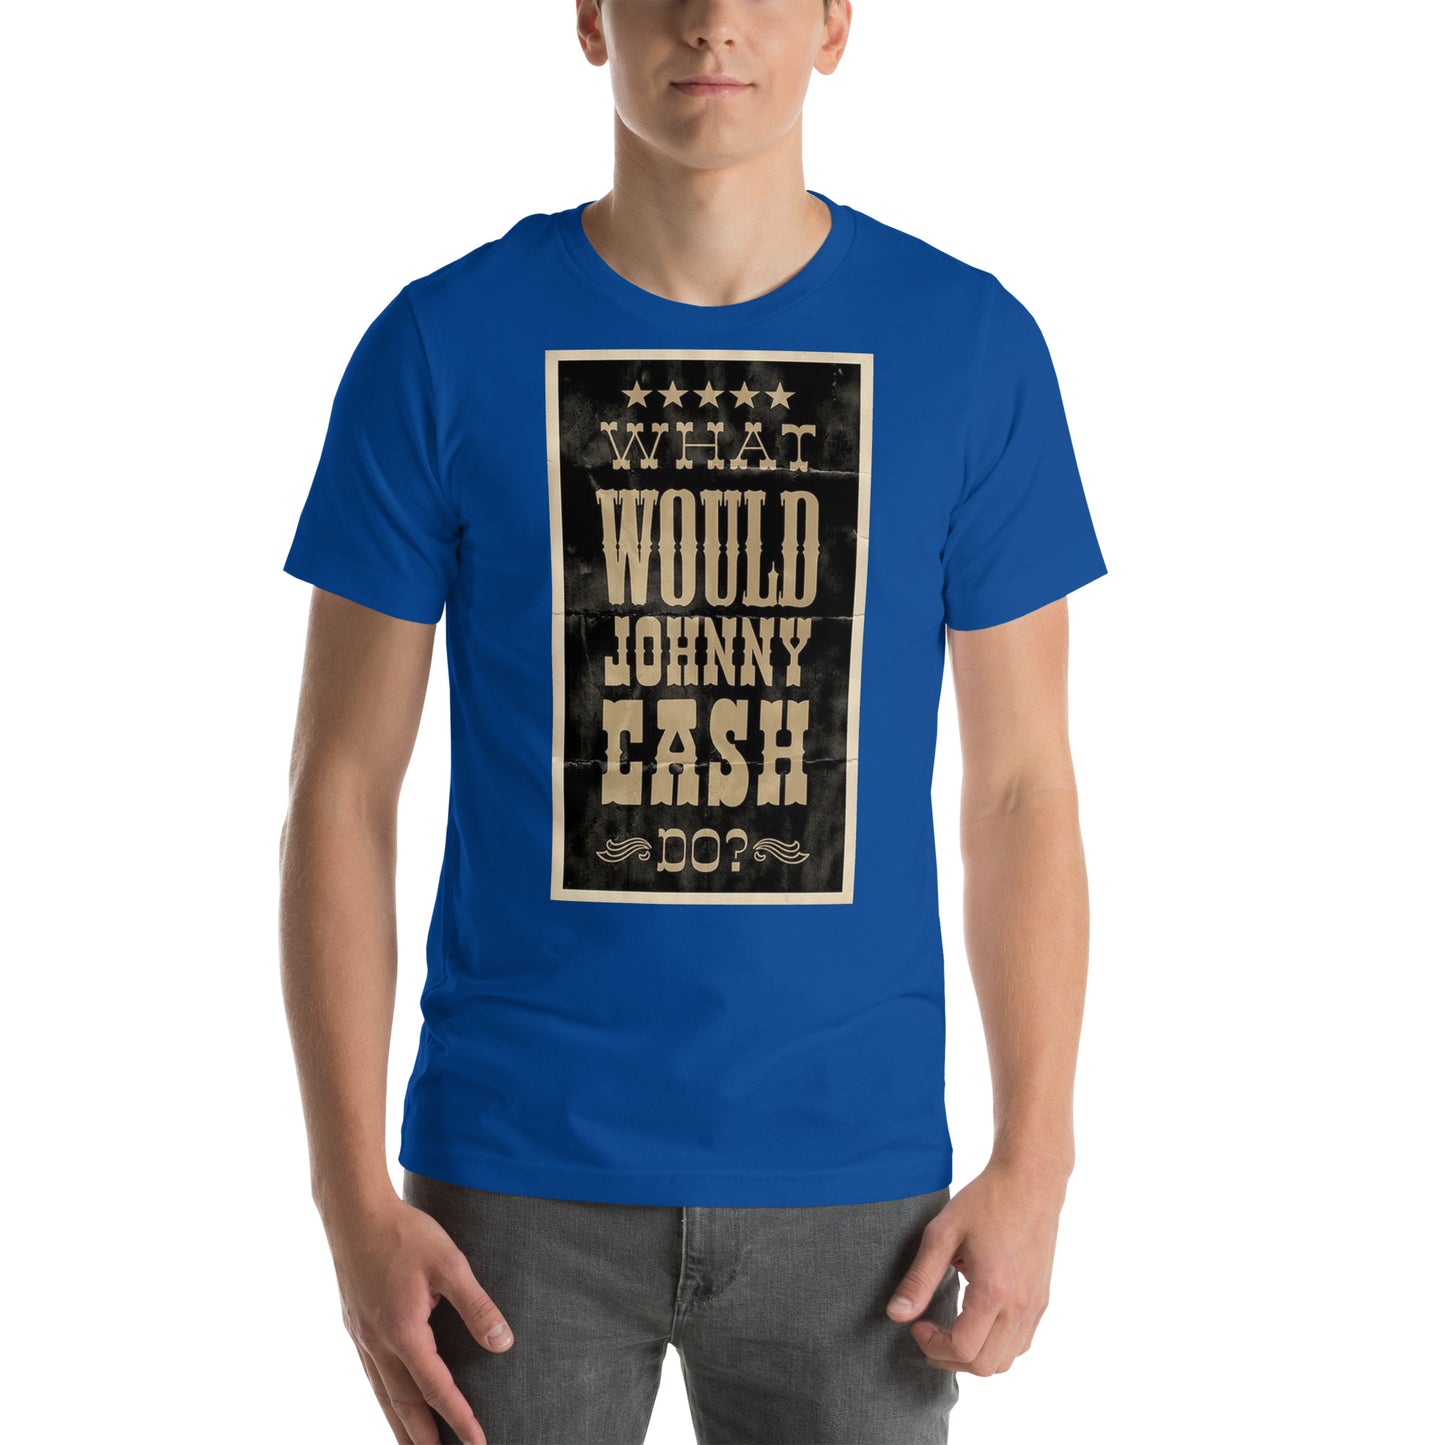 WWJCD? - Classic Country Tees